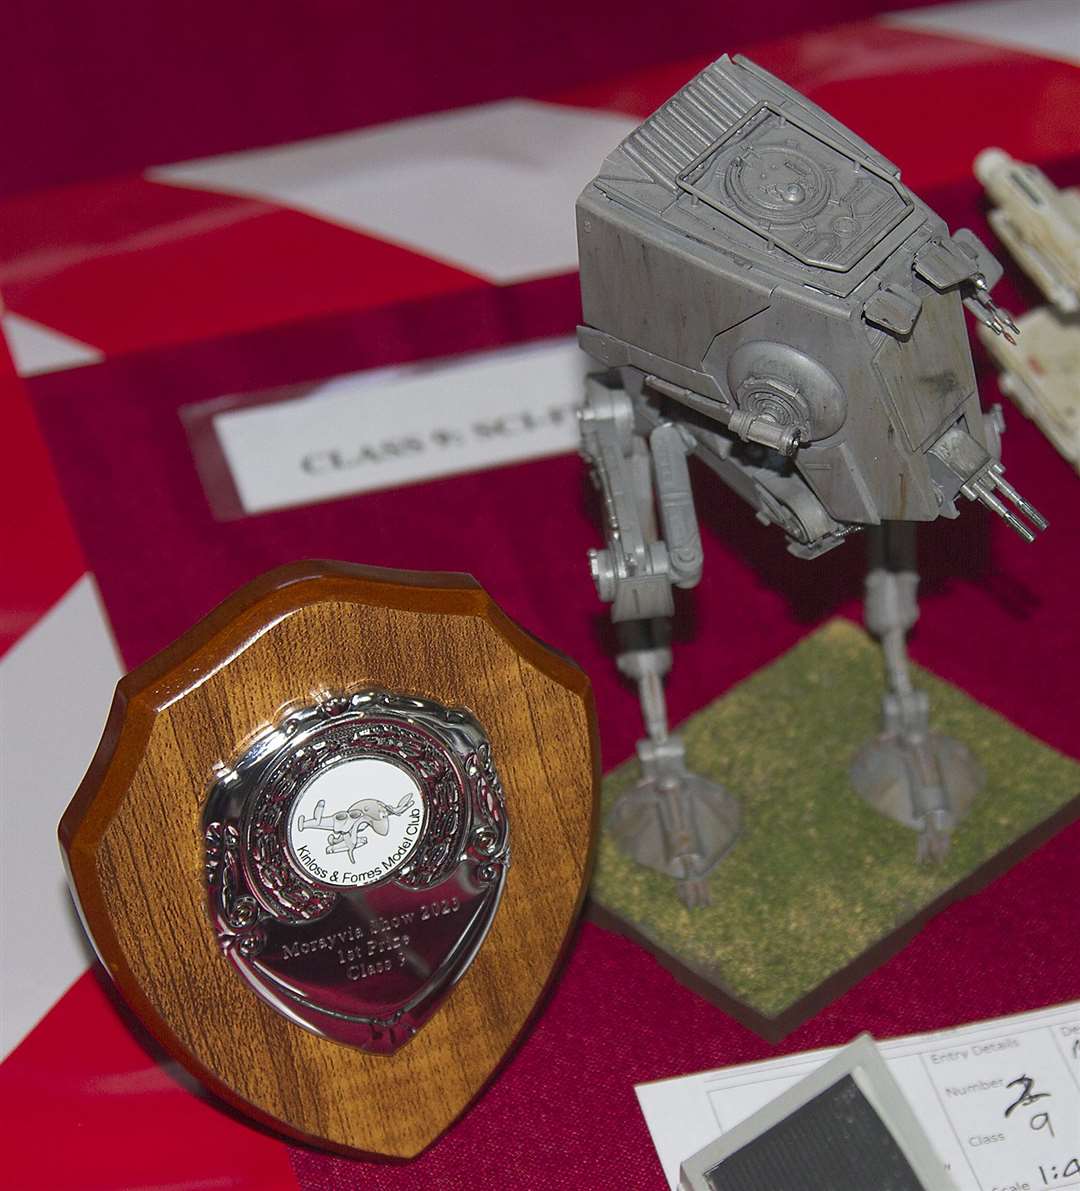 Class 9 was won by Moray resident Keith Hay with a Star Wars AT-ST.